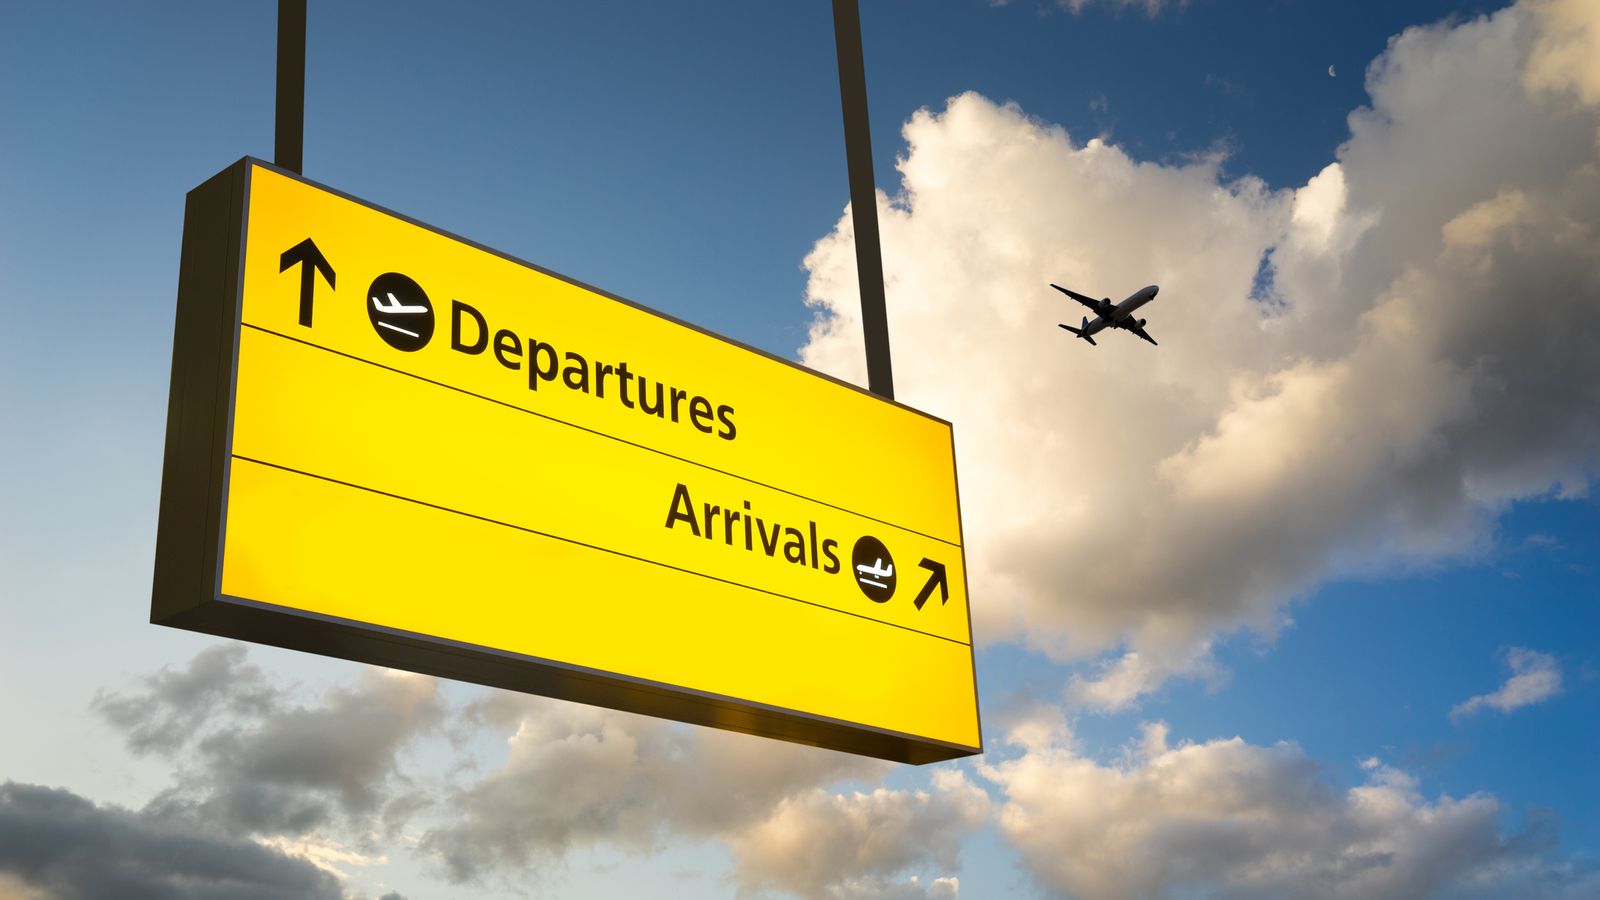 UK's best and worst airports for flight delays revealed - full list